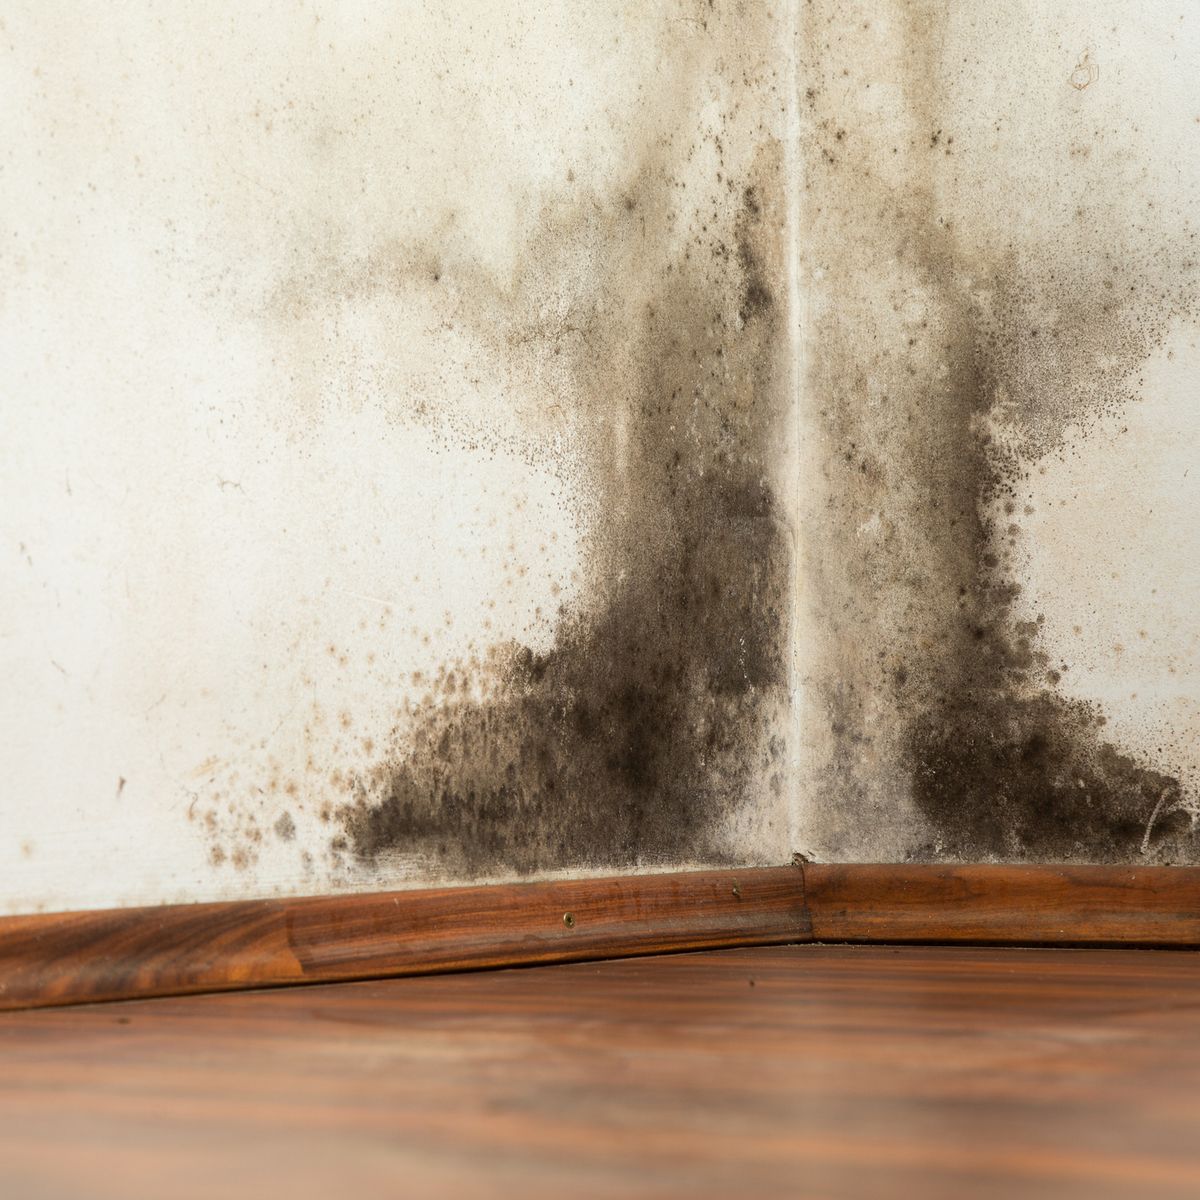 Black Mold Test Kits: What to Look For and What to Avoid